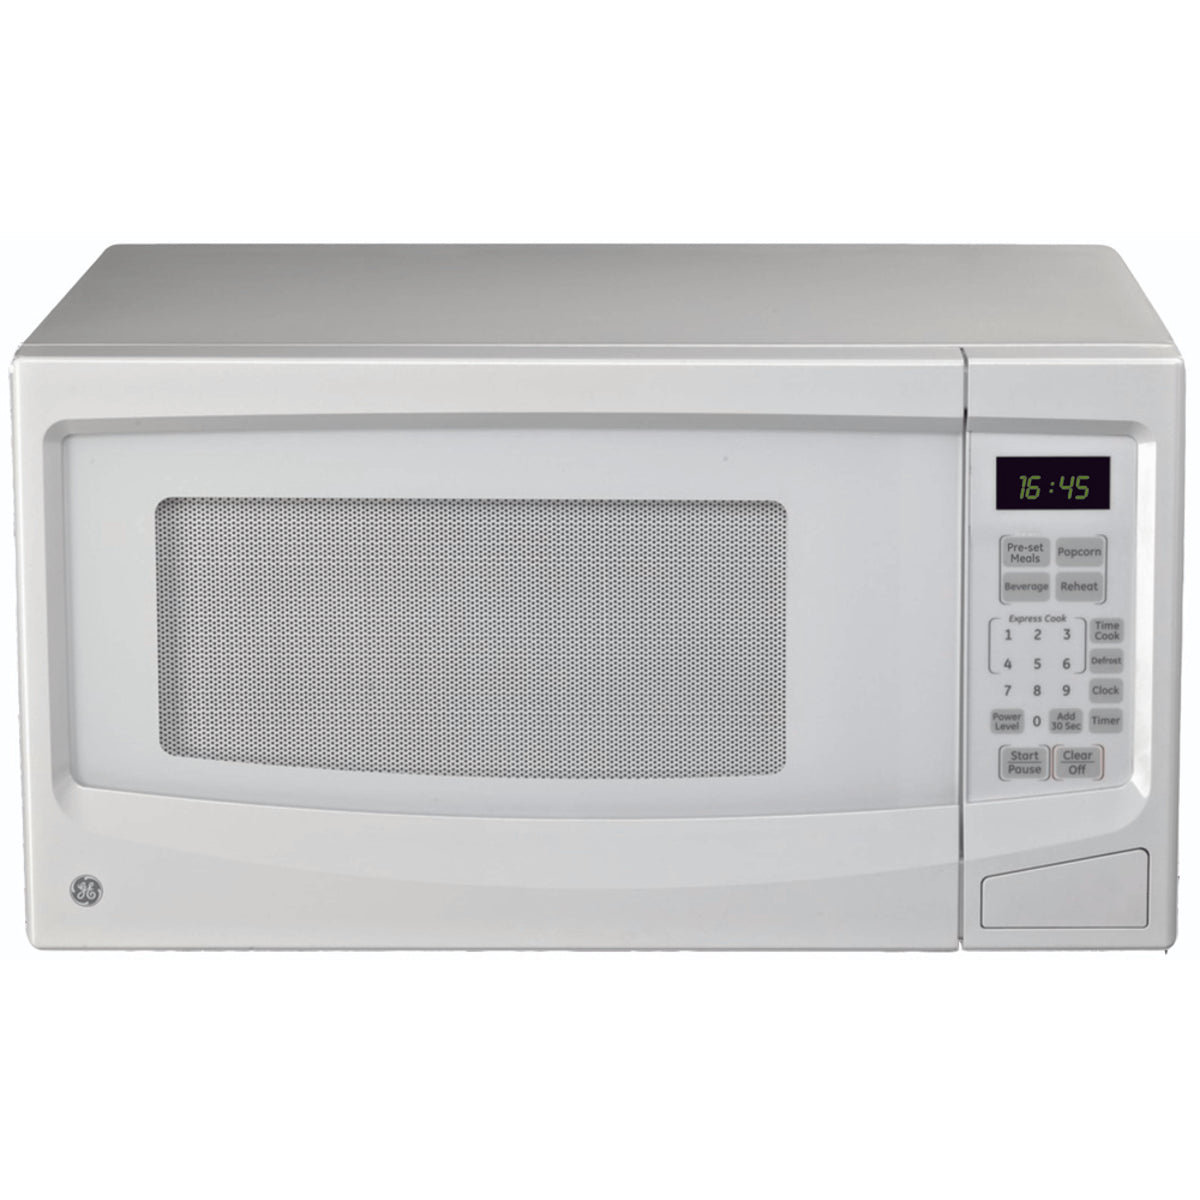 GE - 1.1 cu. Ft  Counter top Microwave in White - JES1145WTC